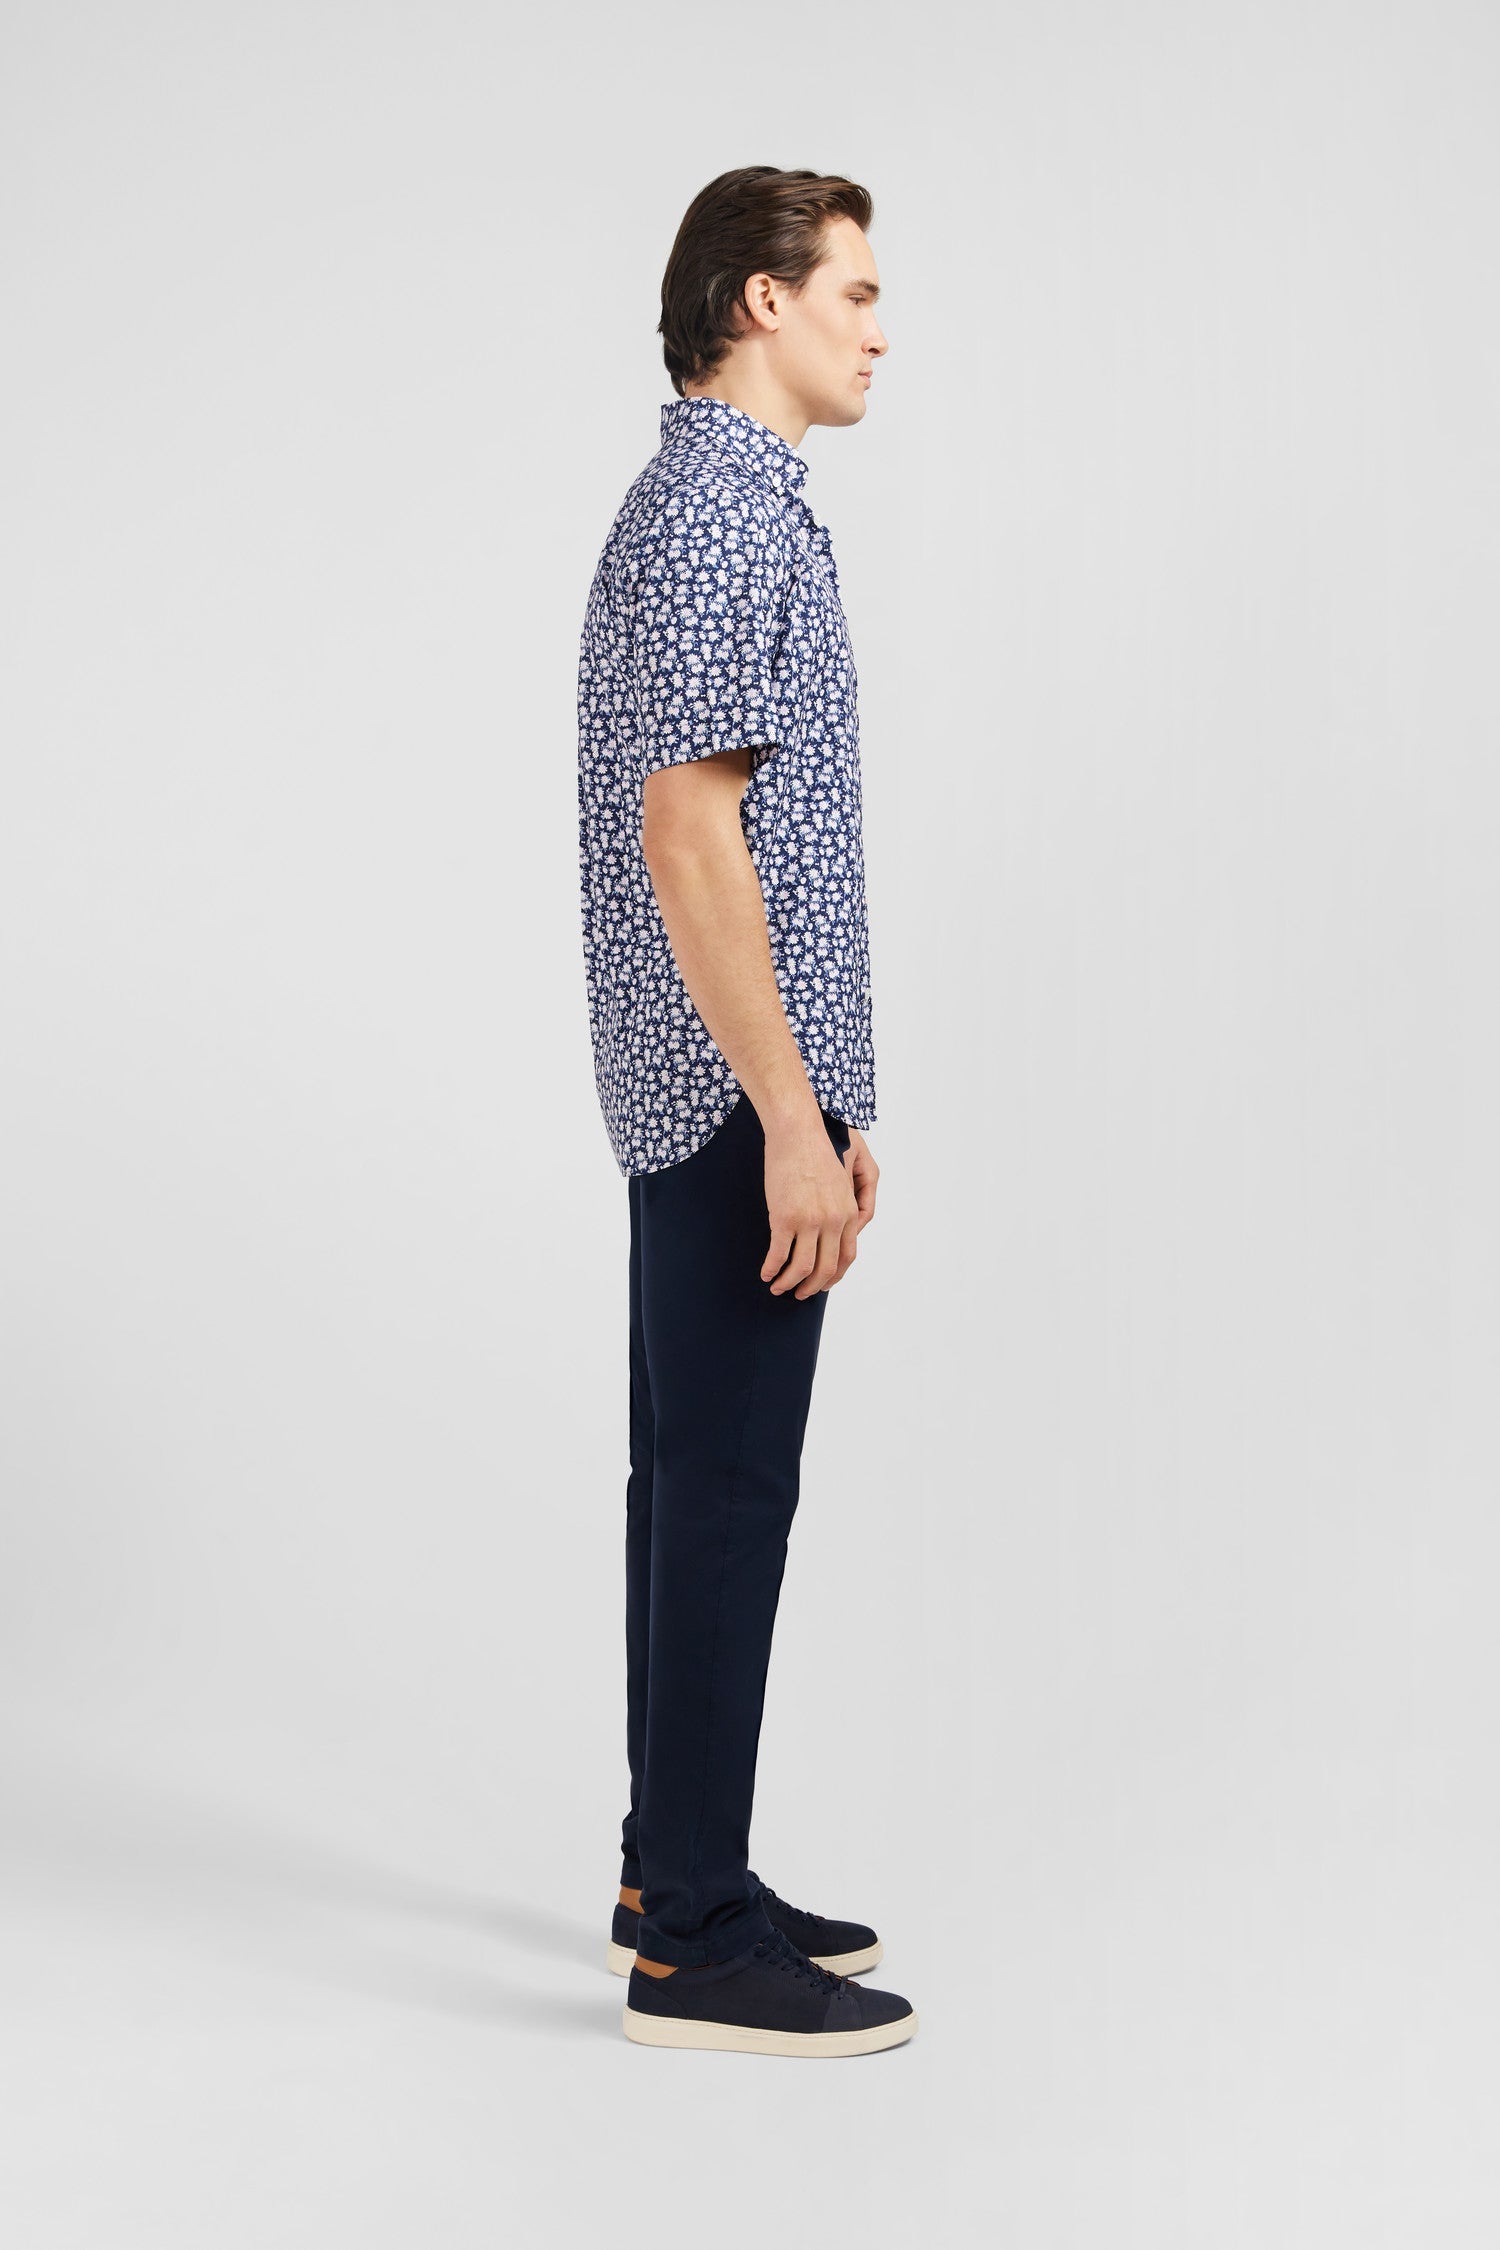 Navy blue shirt with flower print